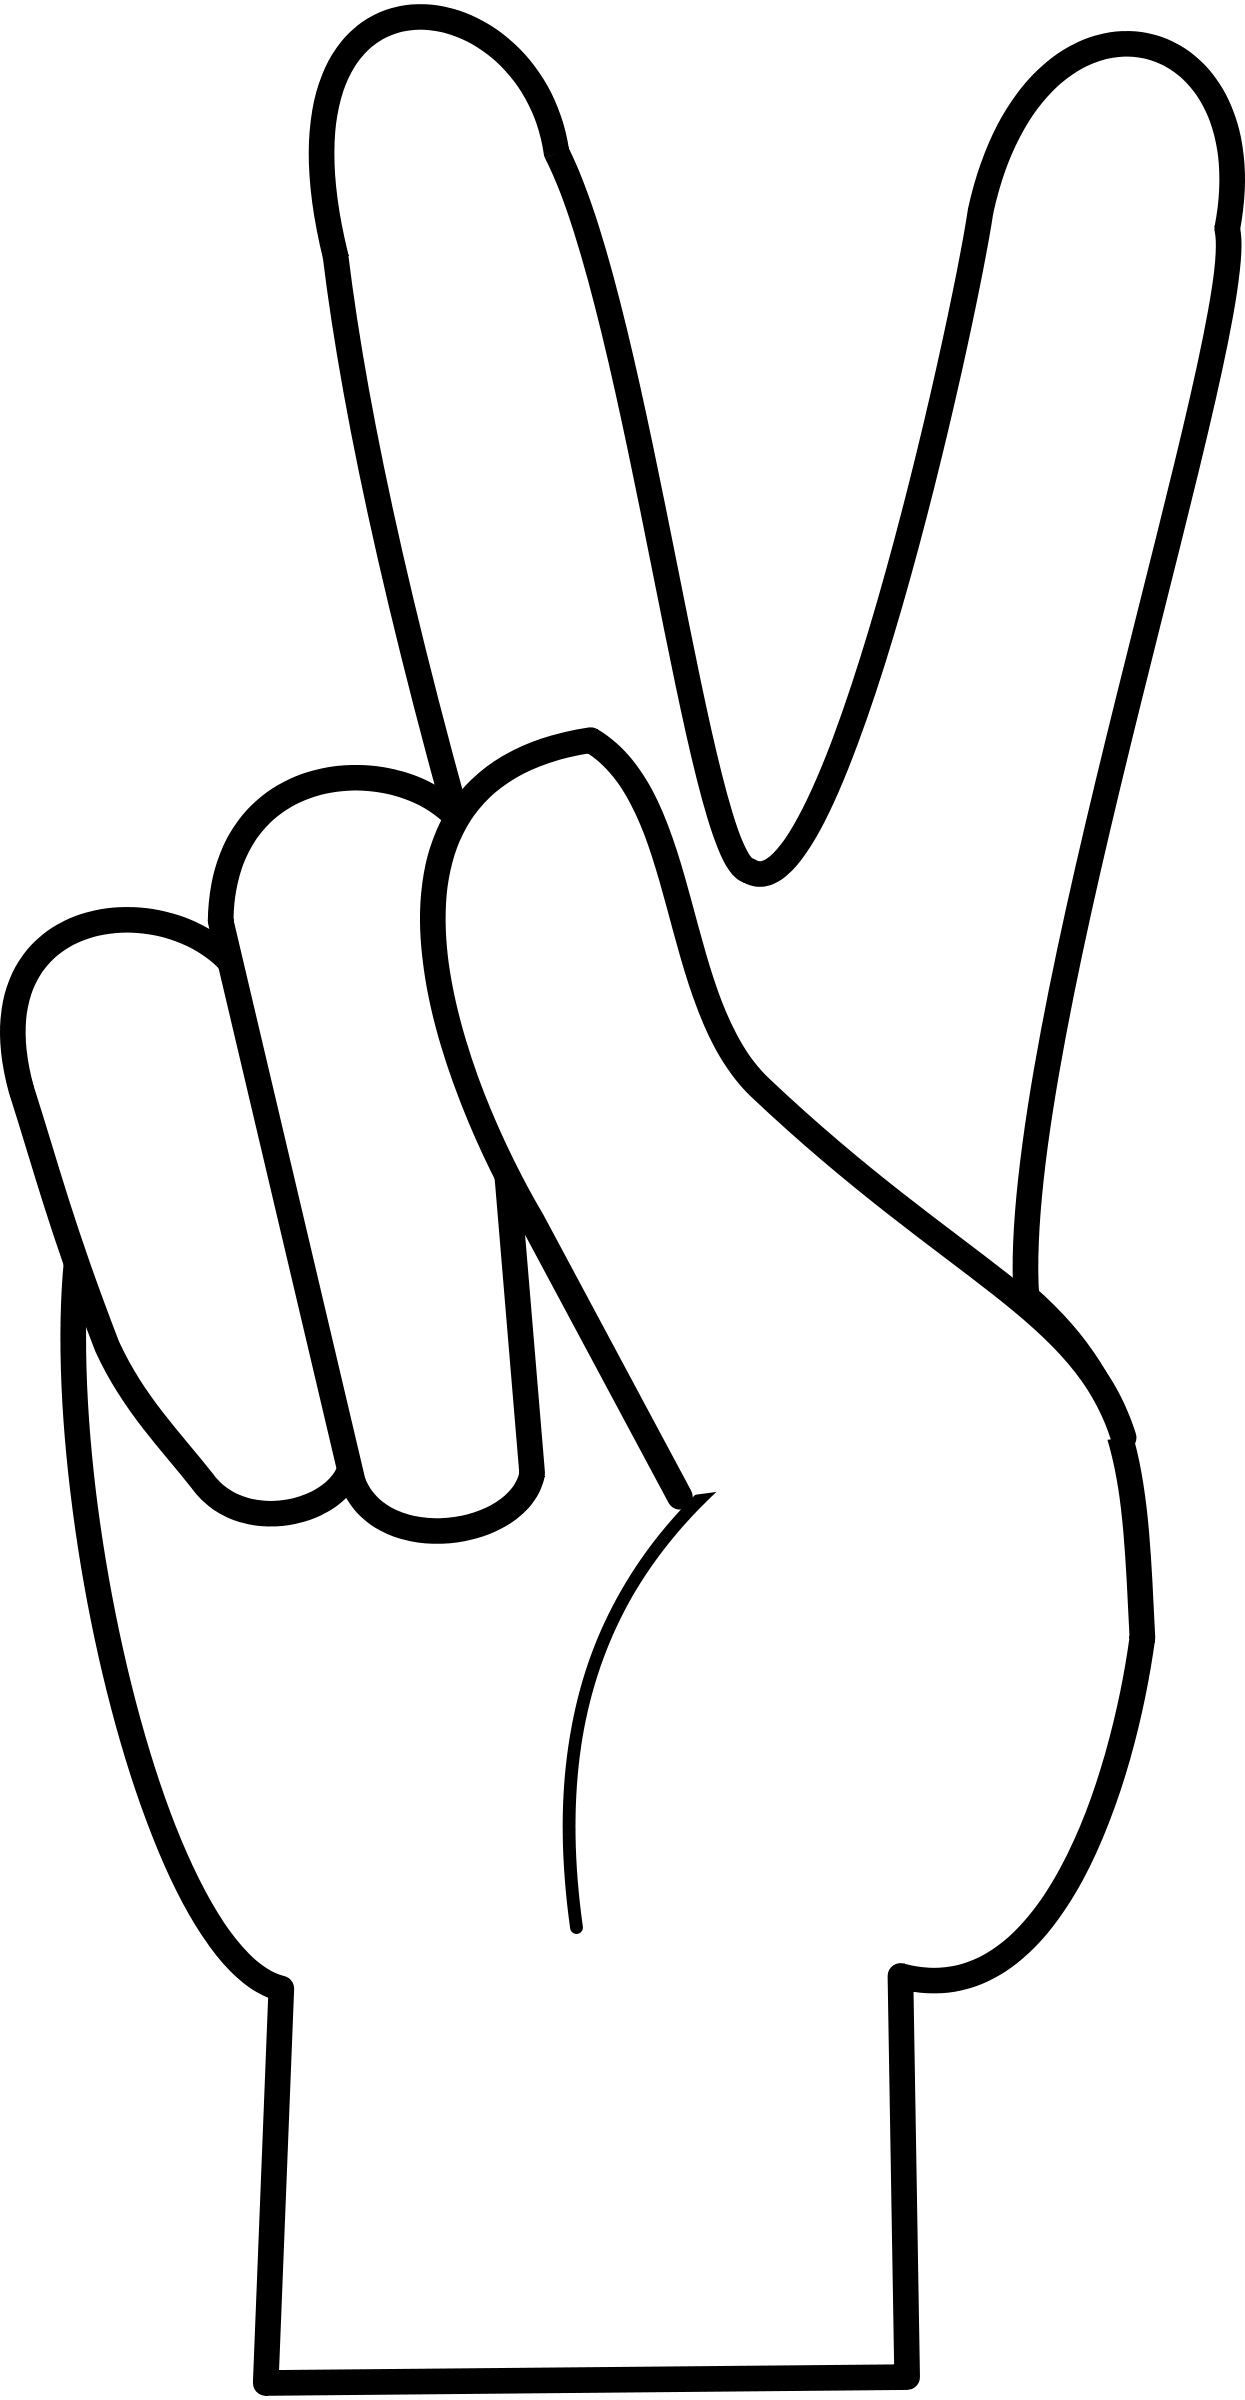 Peace sign panda free. Finger clipart large hand